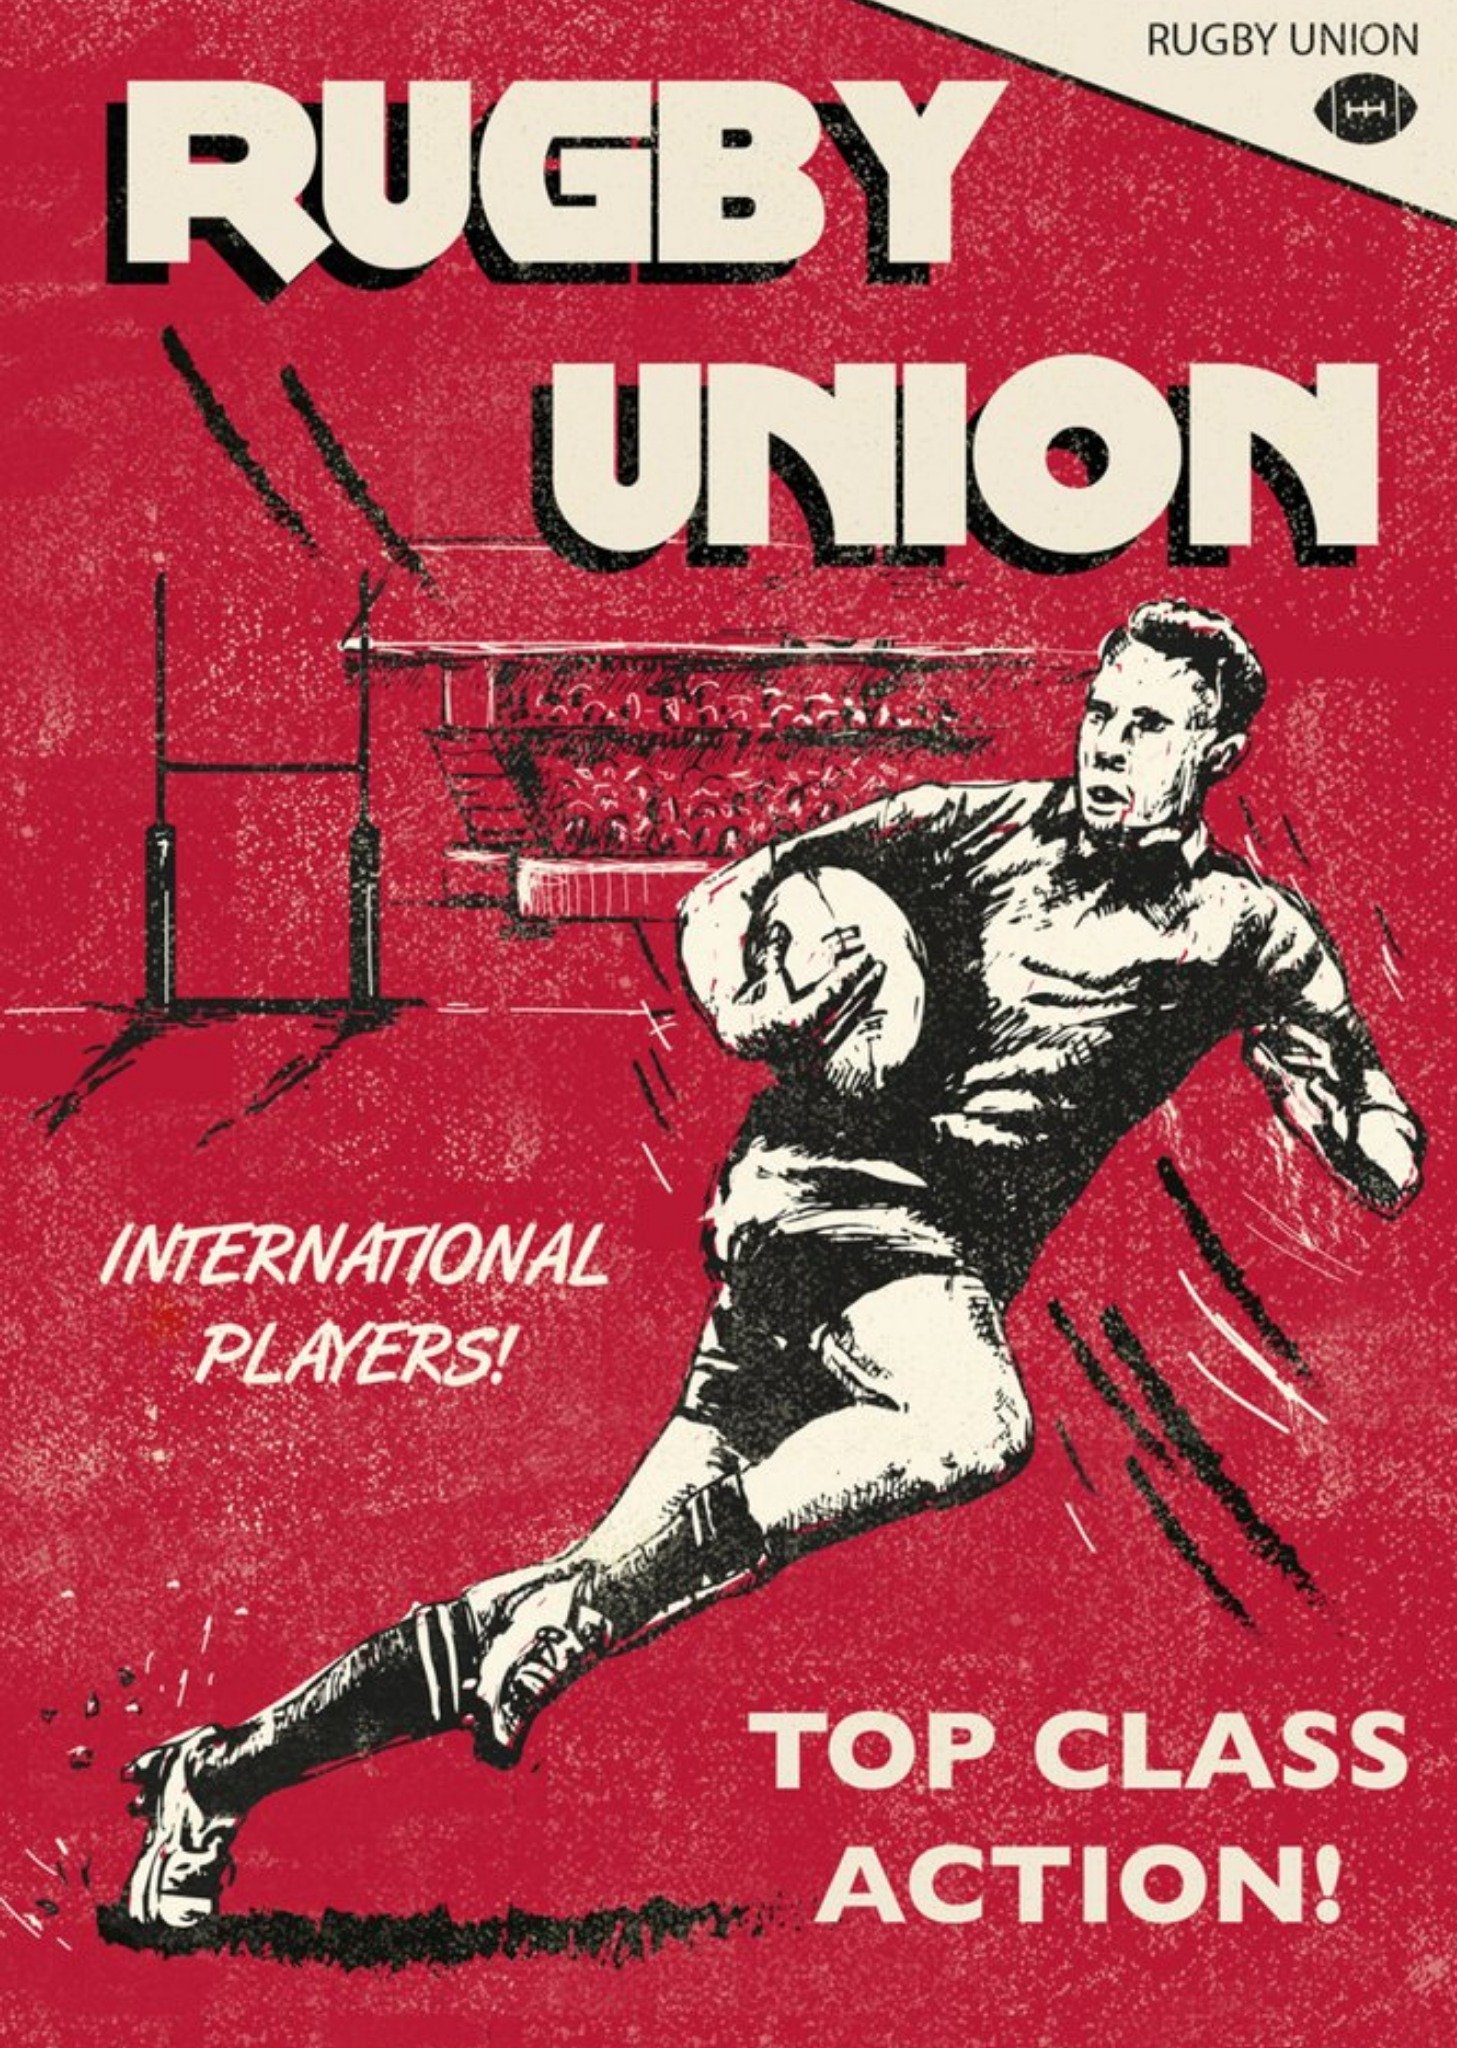 Moonpig Rugby Union Top Class Action Card, Large